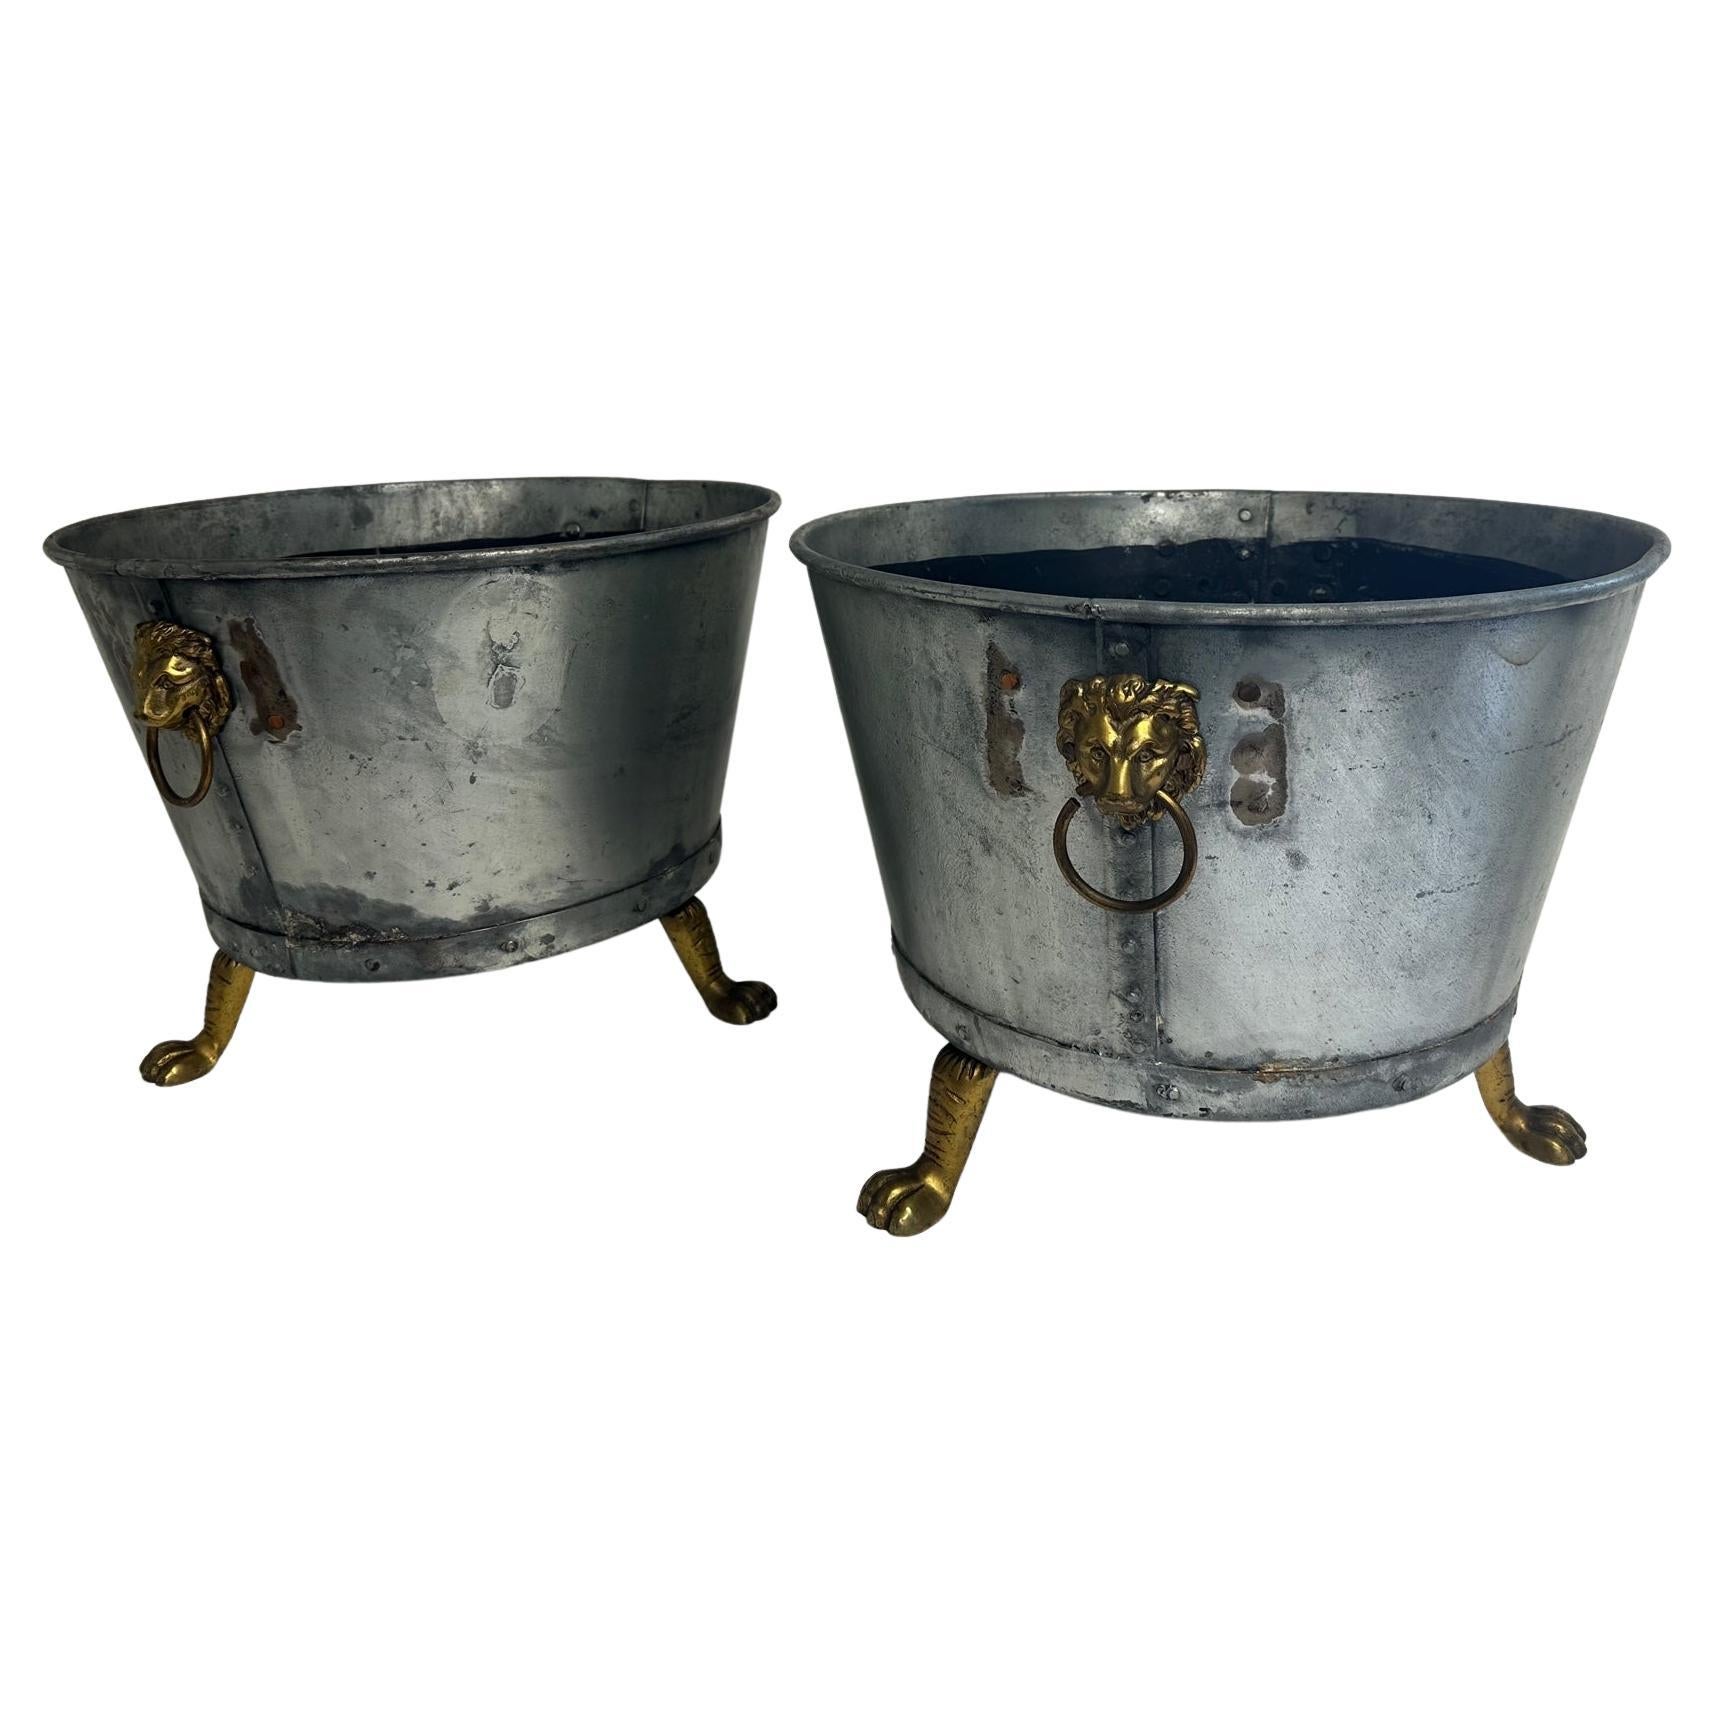 Handsome Pair of Hand Made Galvanized Metal Planters with Lion Handles